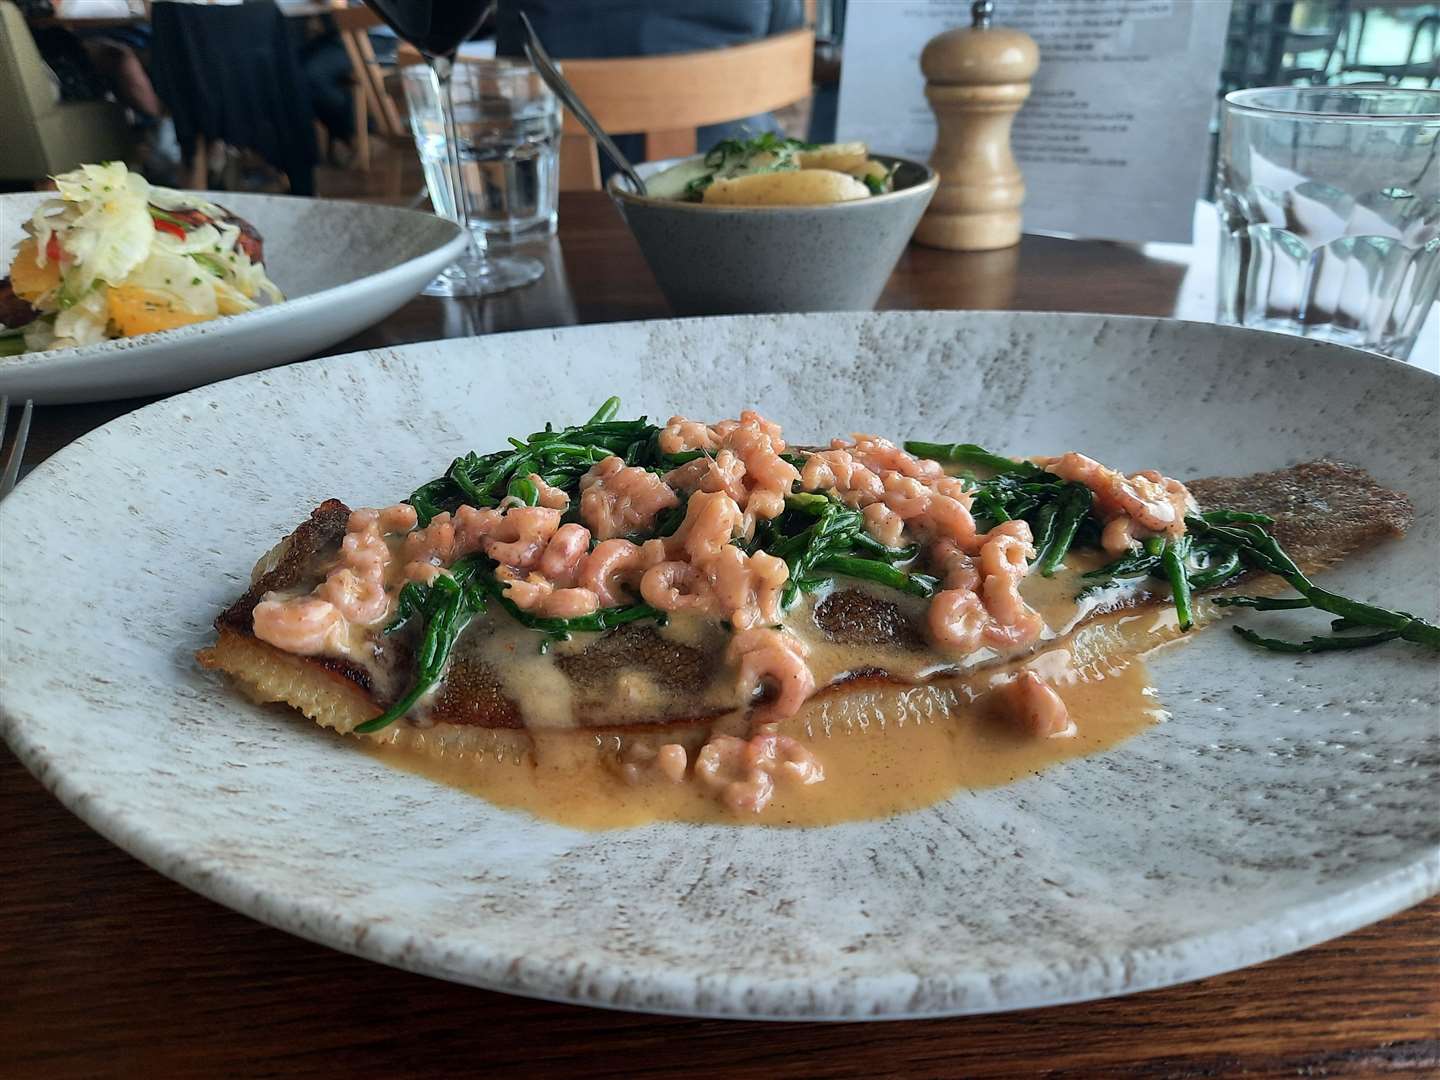 For his main, our reporter ordered lemon sole, samphire and melted potted shrimp at Rocksalt in Folkestone